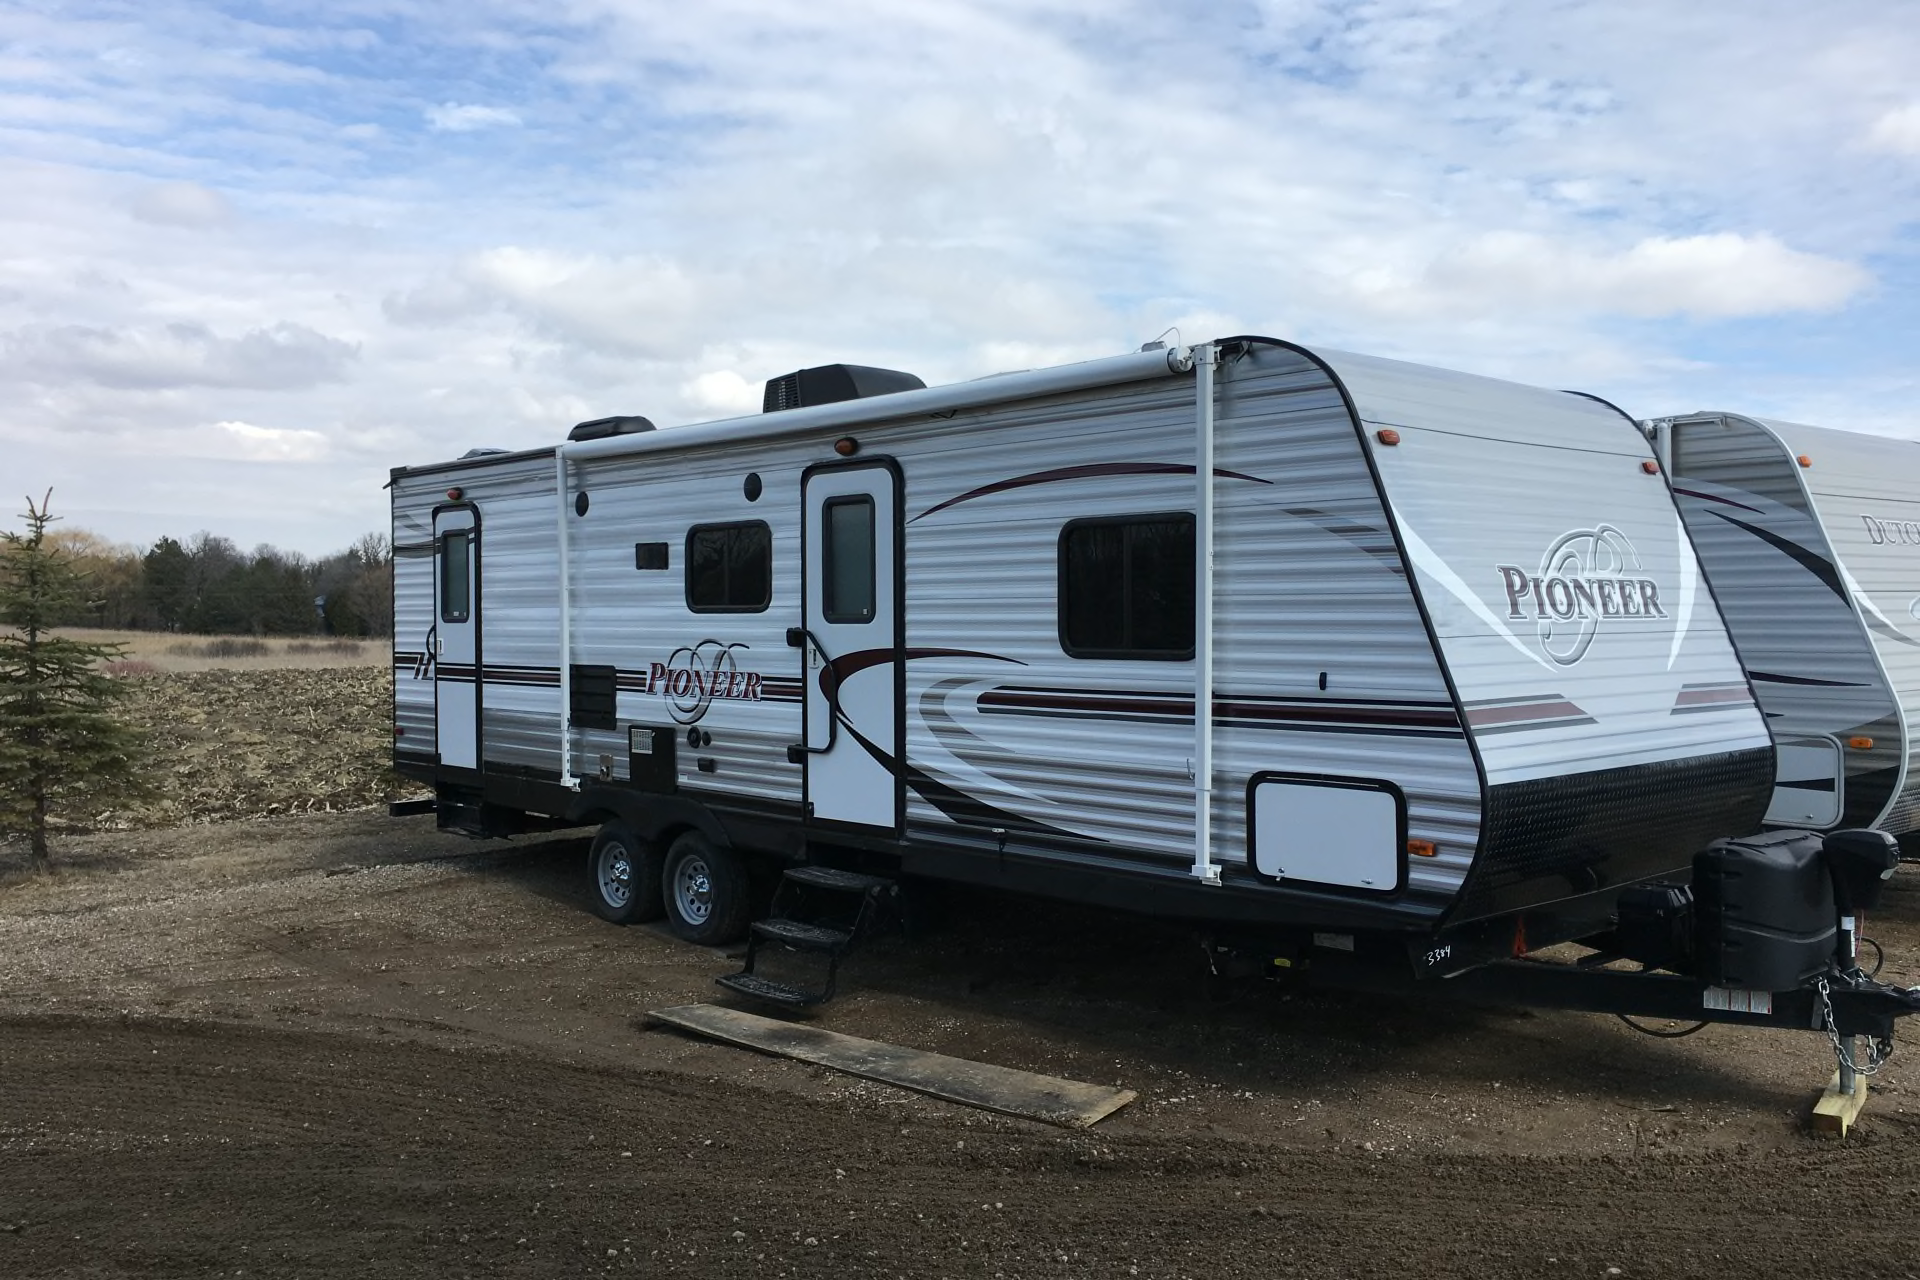 2015 Heartland Pioneer BH270 Travel Trailer RV For Rent